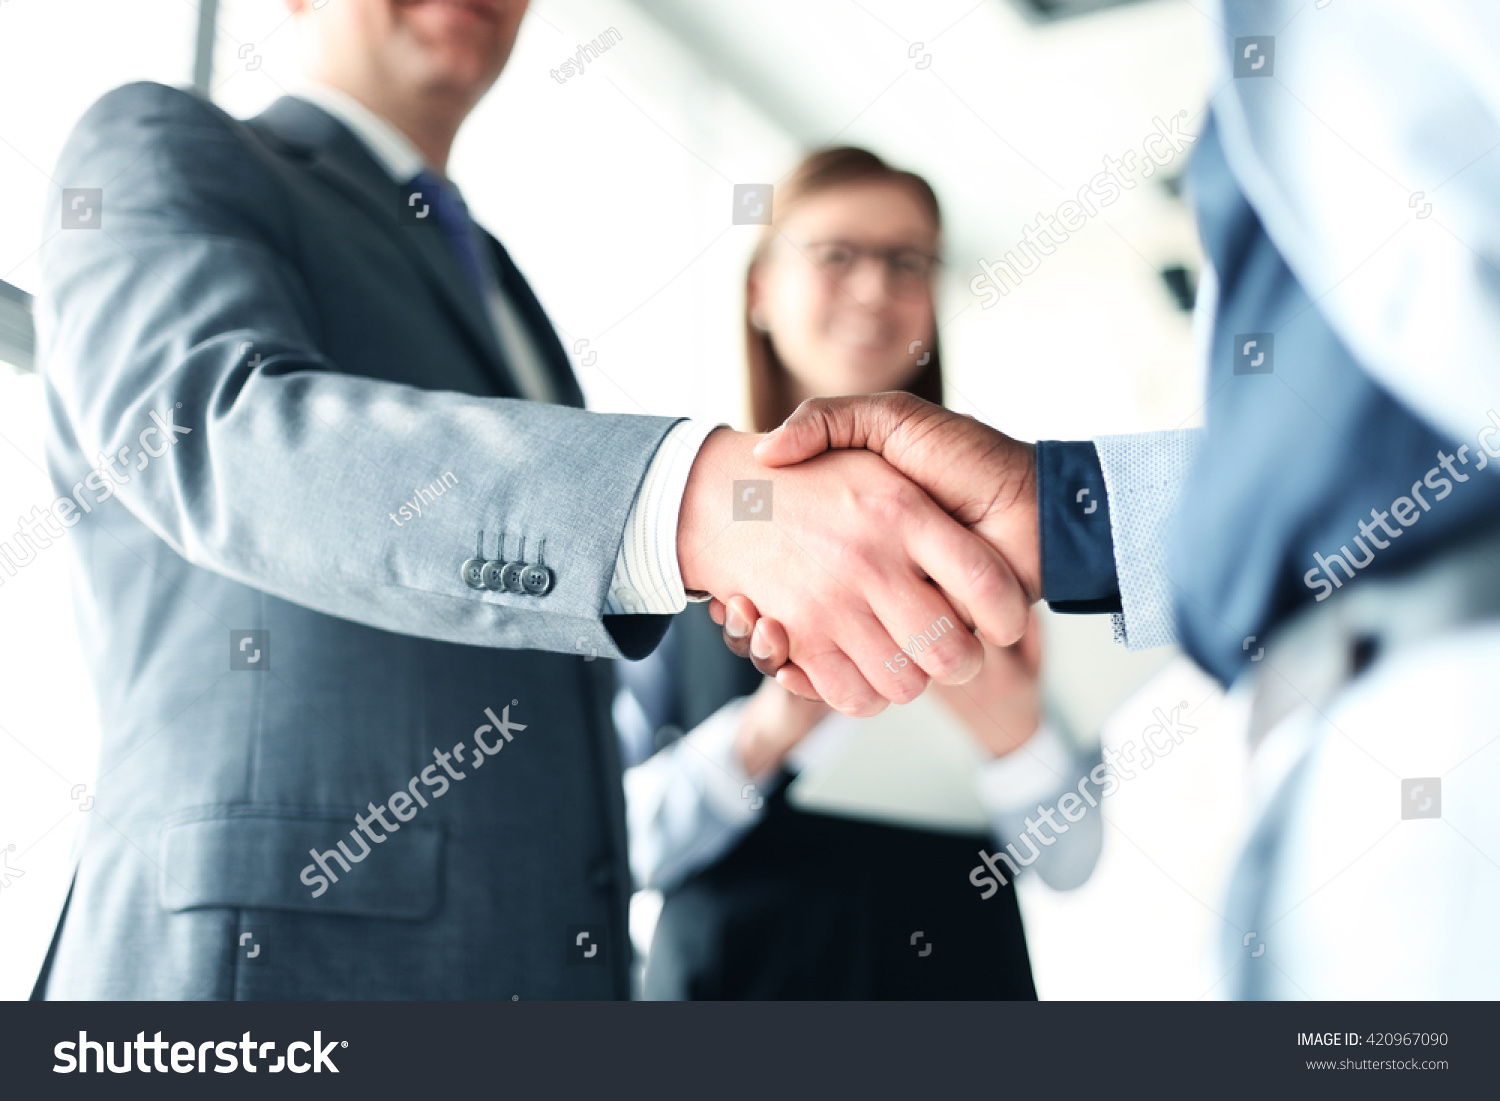 Business people shaking hands, finishing up a meeting #420967090